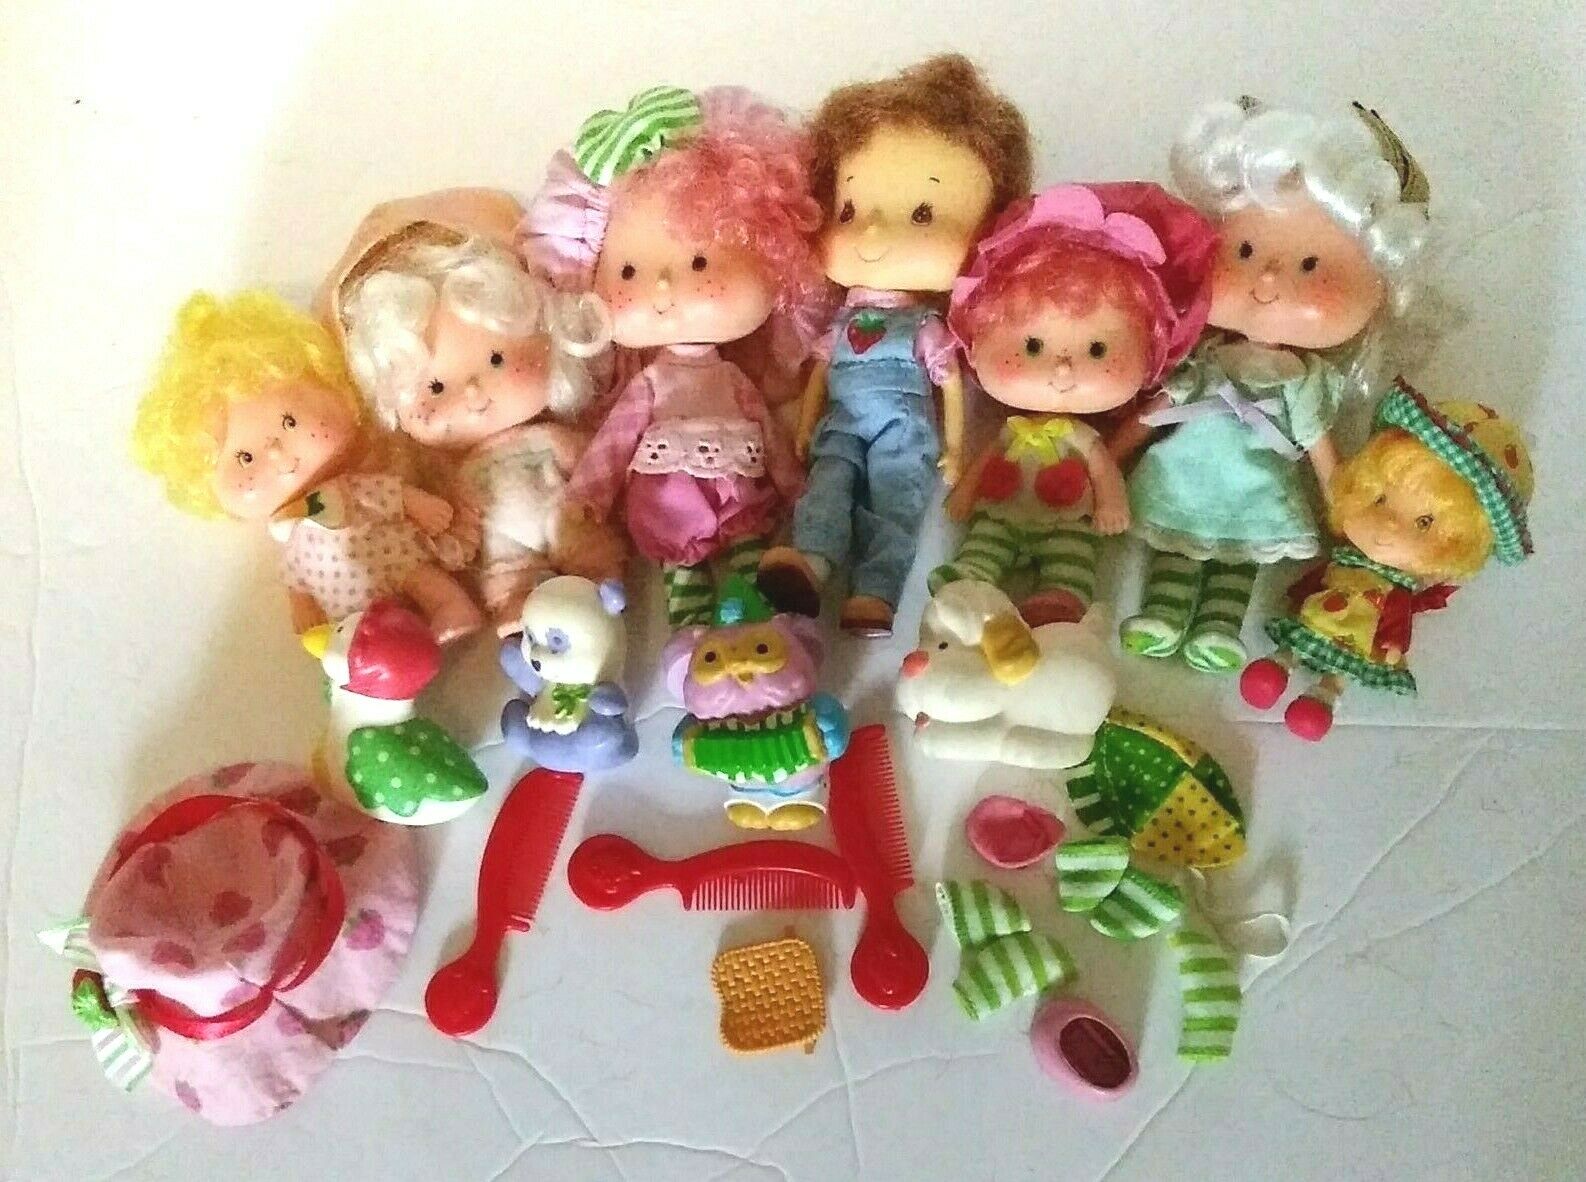 Vintage Strawberry Shortcake Lot Of 7 Dolls Figures And Accessories With 4 Pets